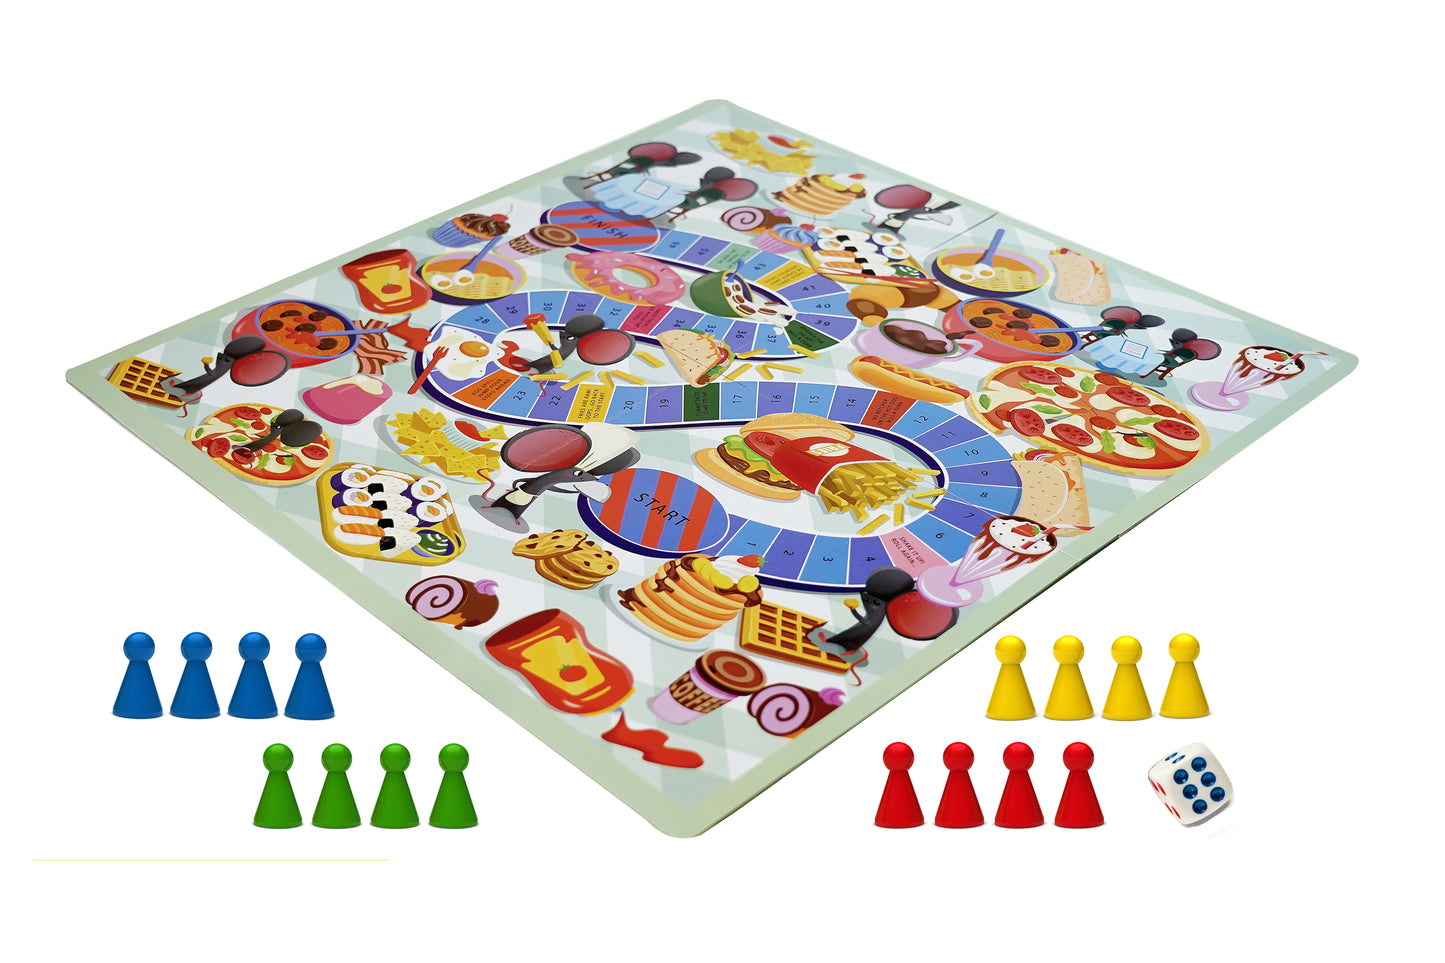 The 2-in-1 Board Game